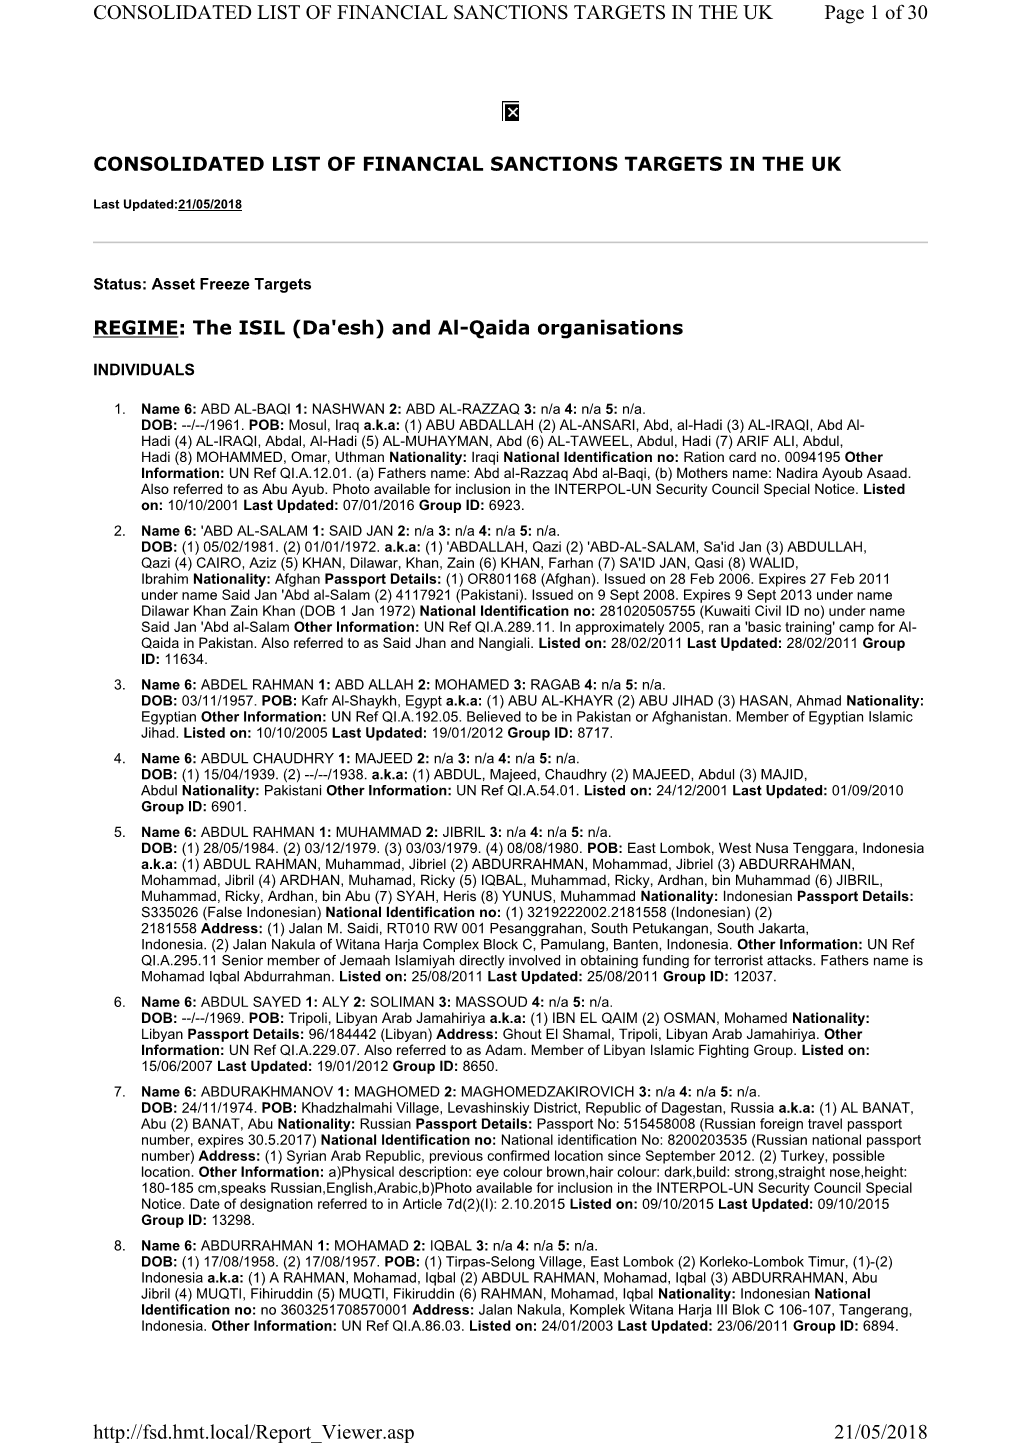 Page 1 of 30 CONSOLIDATED LIST of FINANCIAL SANCTIONS TARGETS in the UK 21/05/2018